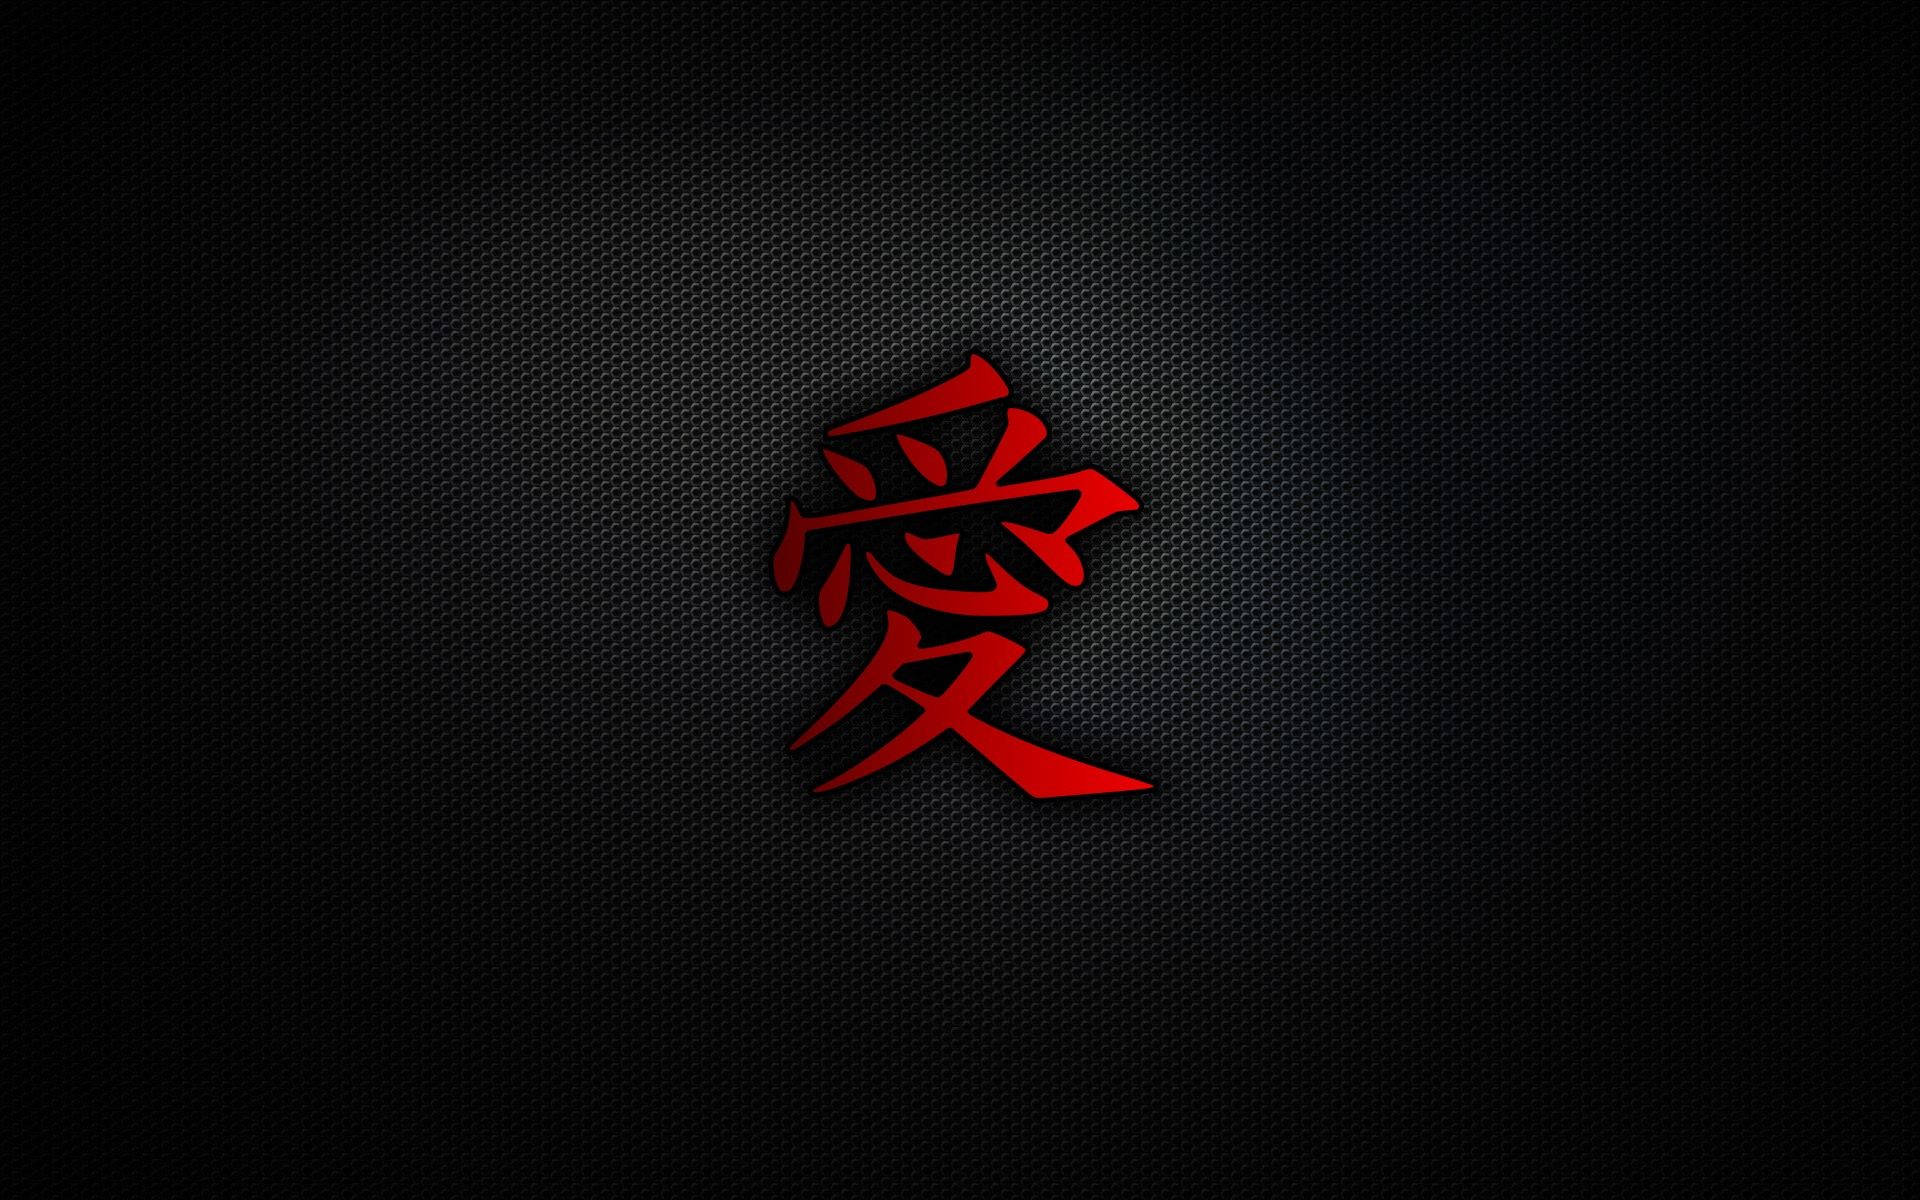 "The Complexity Of Japanese Kanji" Wallpaper